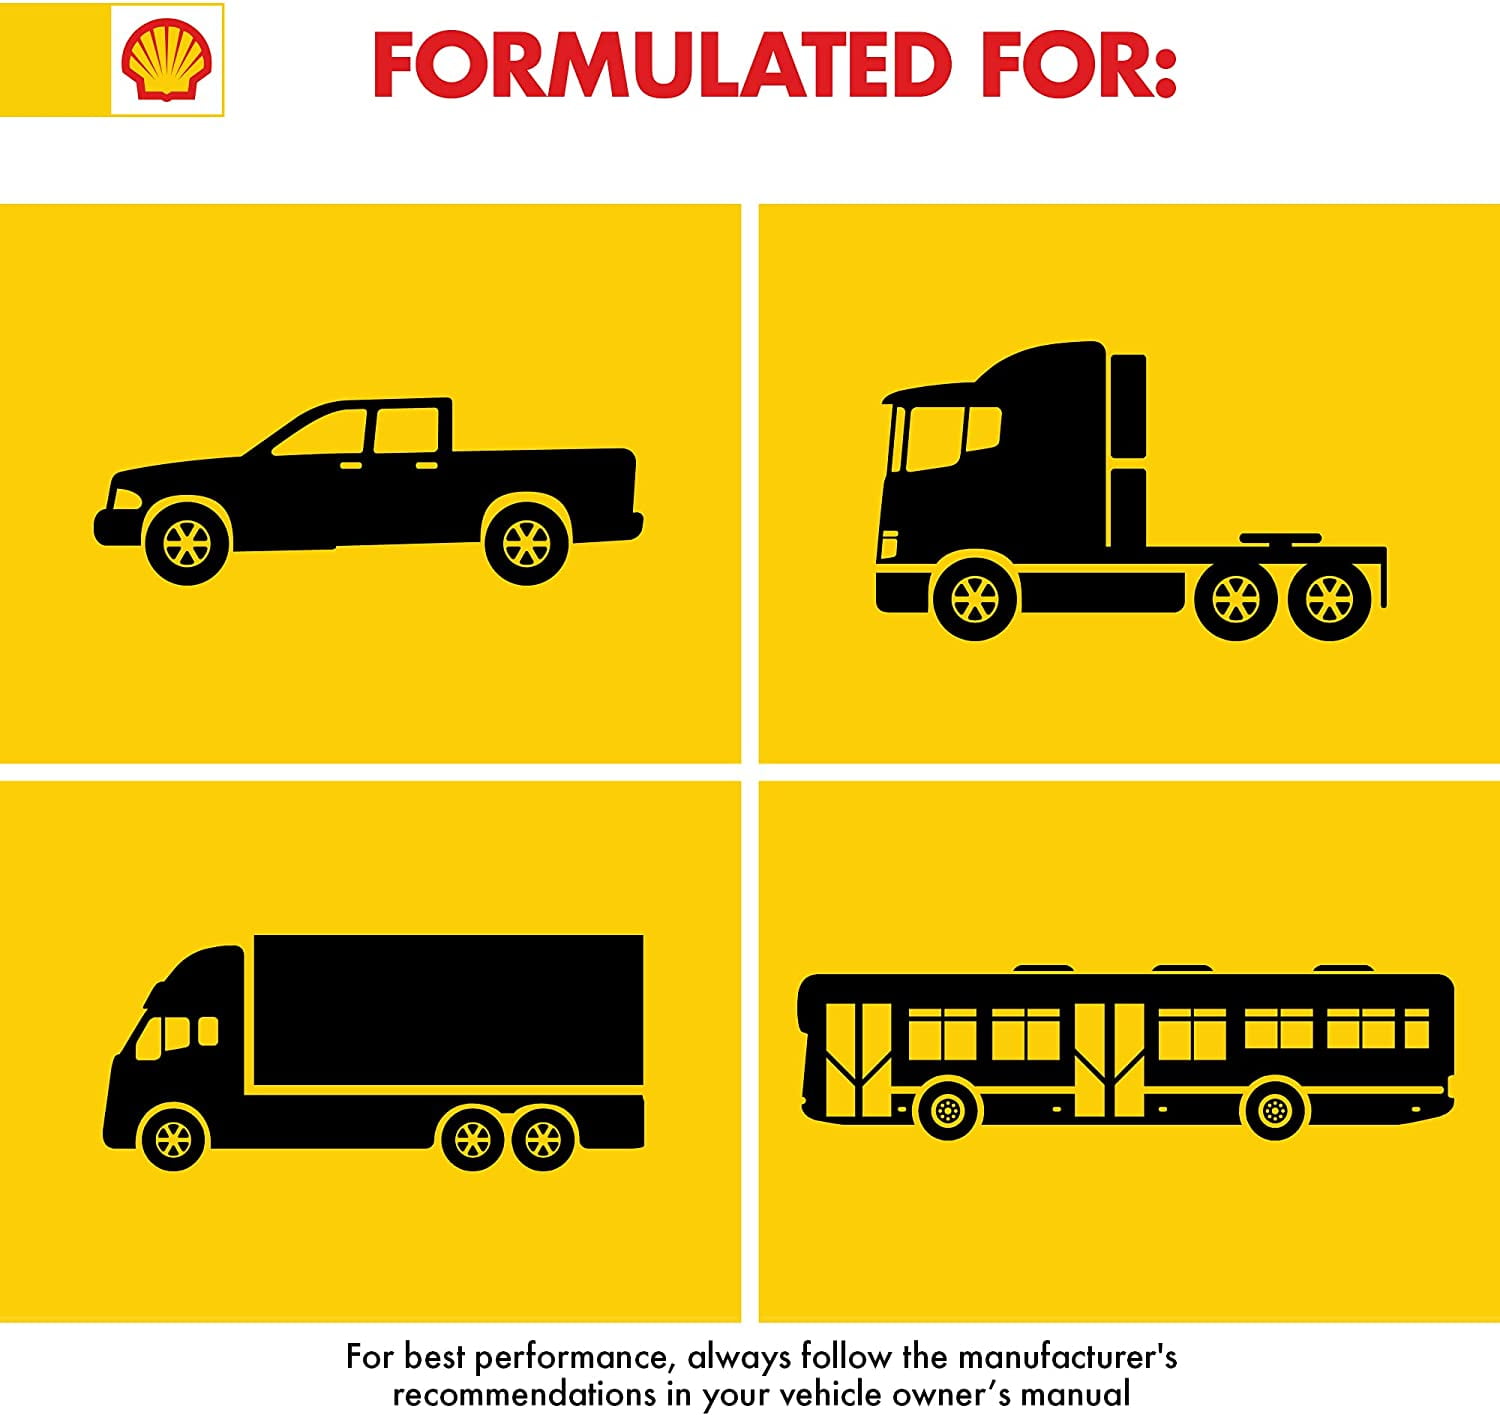 Shell Rotella T6 Multi-Vehicle Full Synthetic 5W-30 Diesel Engine Oil, 1 Gallon - 2